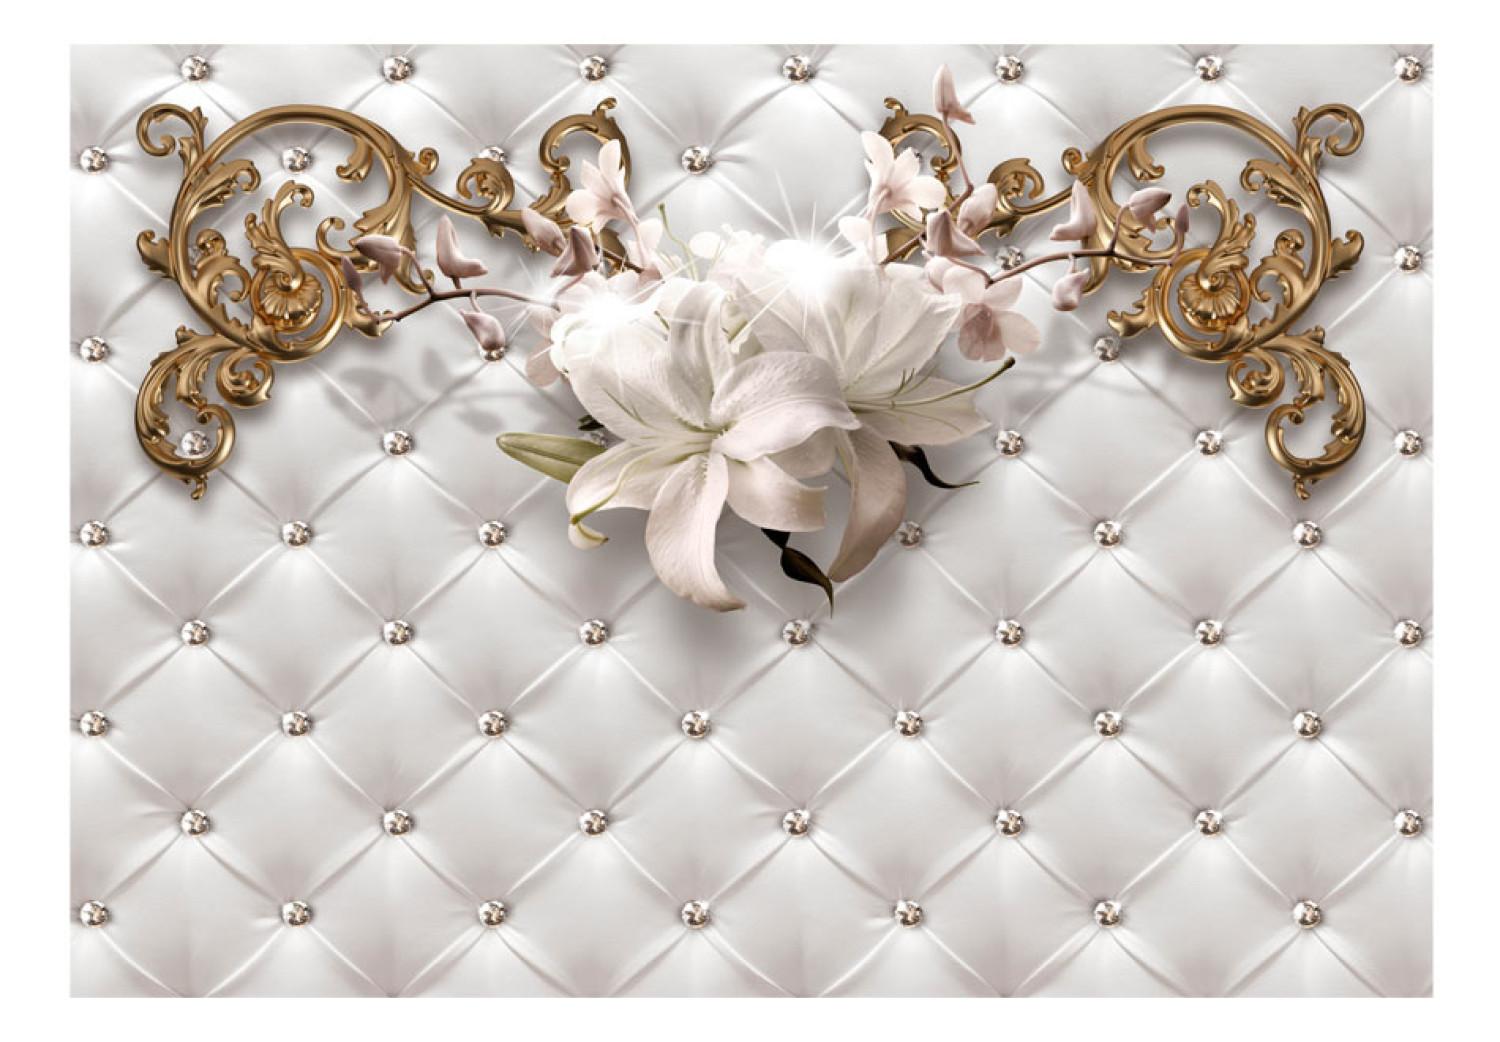 Wall Mural Dazzle - white flowers with gold ornaments on a quilted background